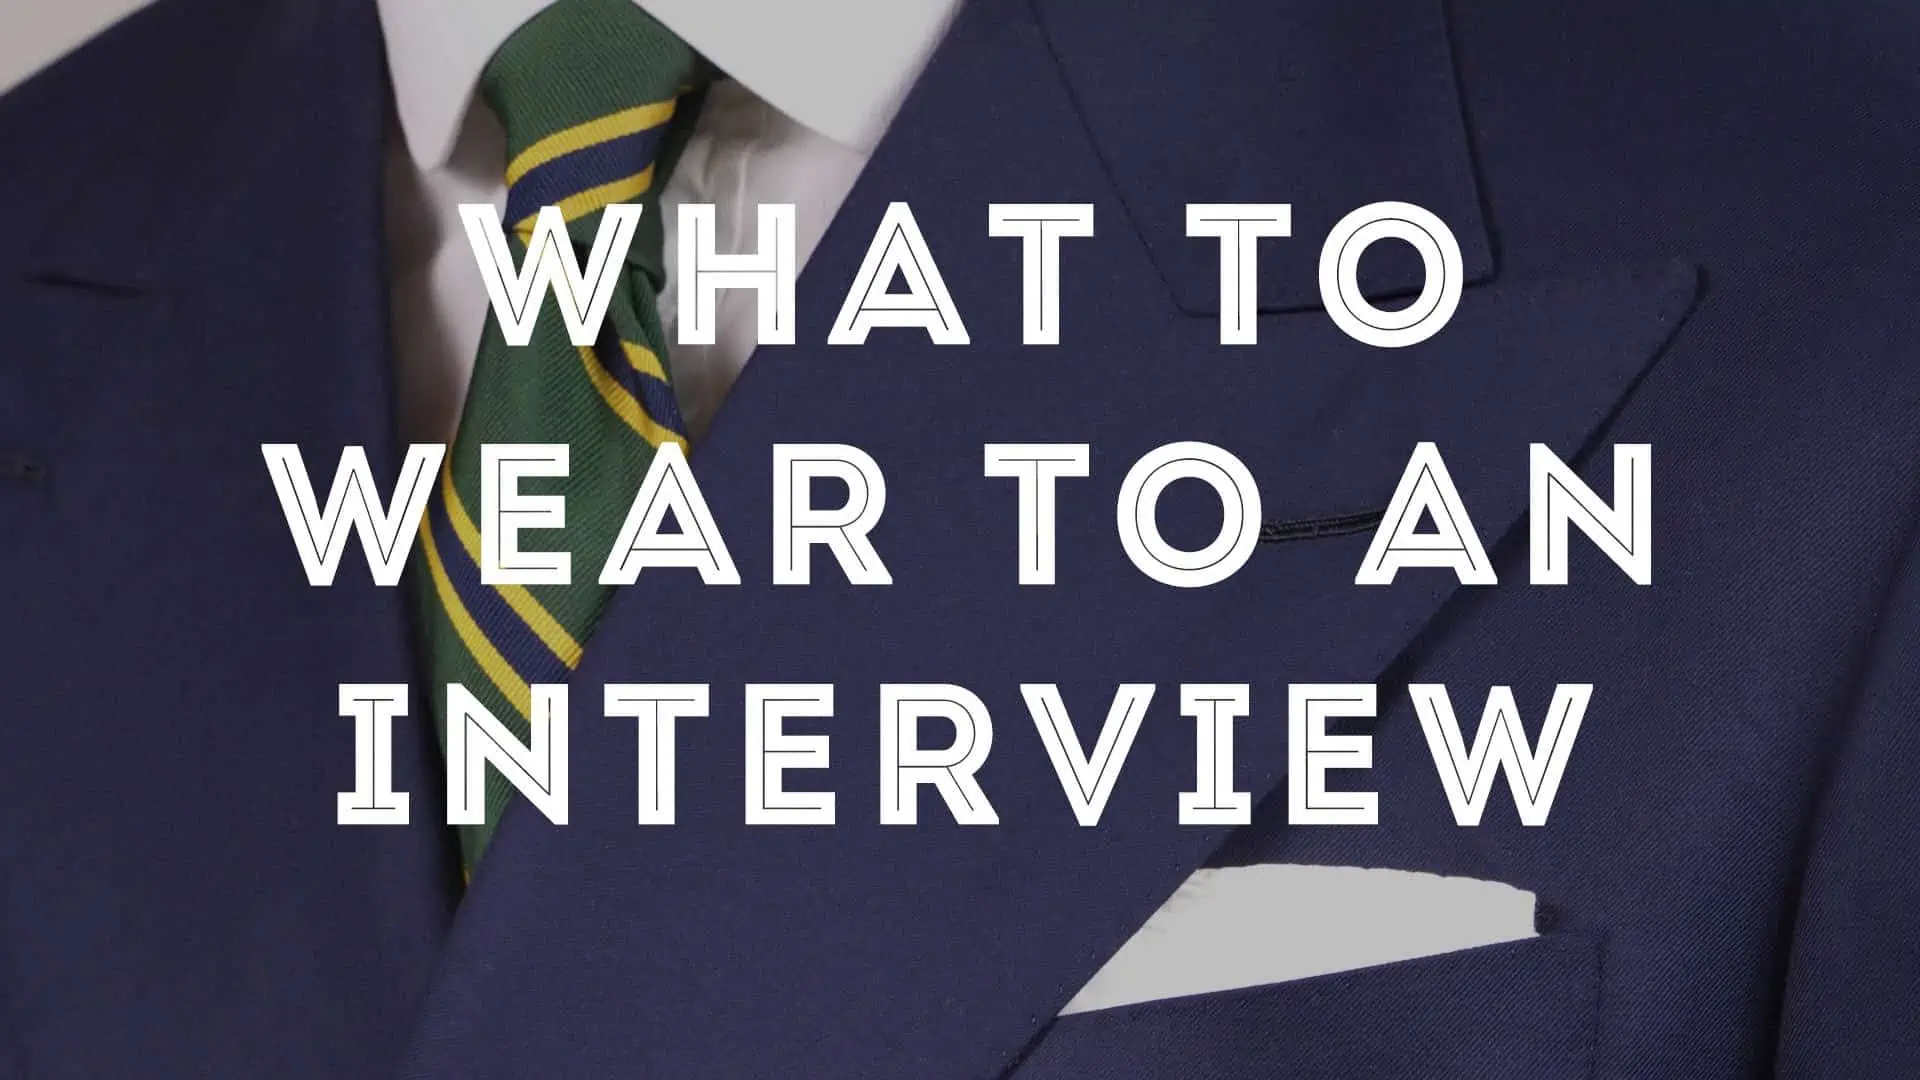 What To Wear To An Interview